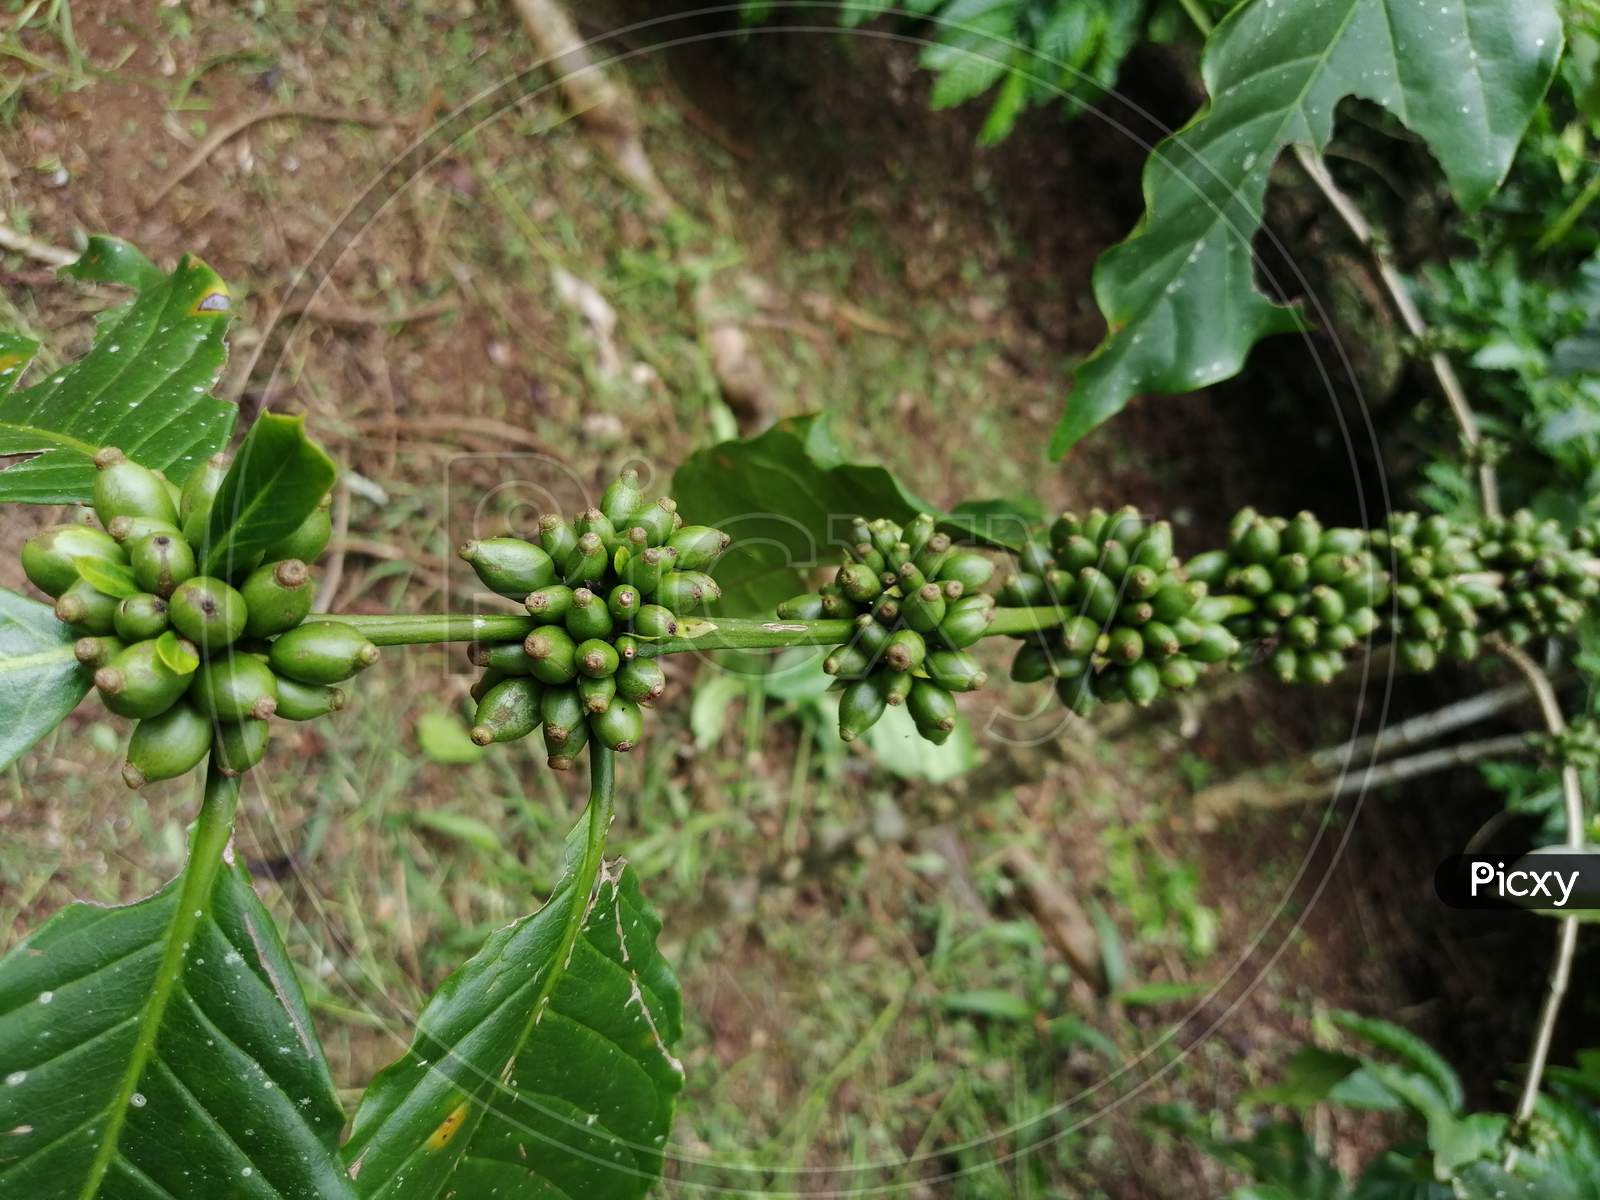 Growing Robusta Coffee Beans Which Are Small And Green In Color